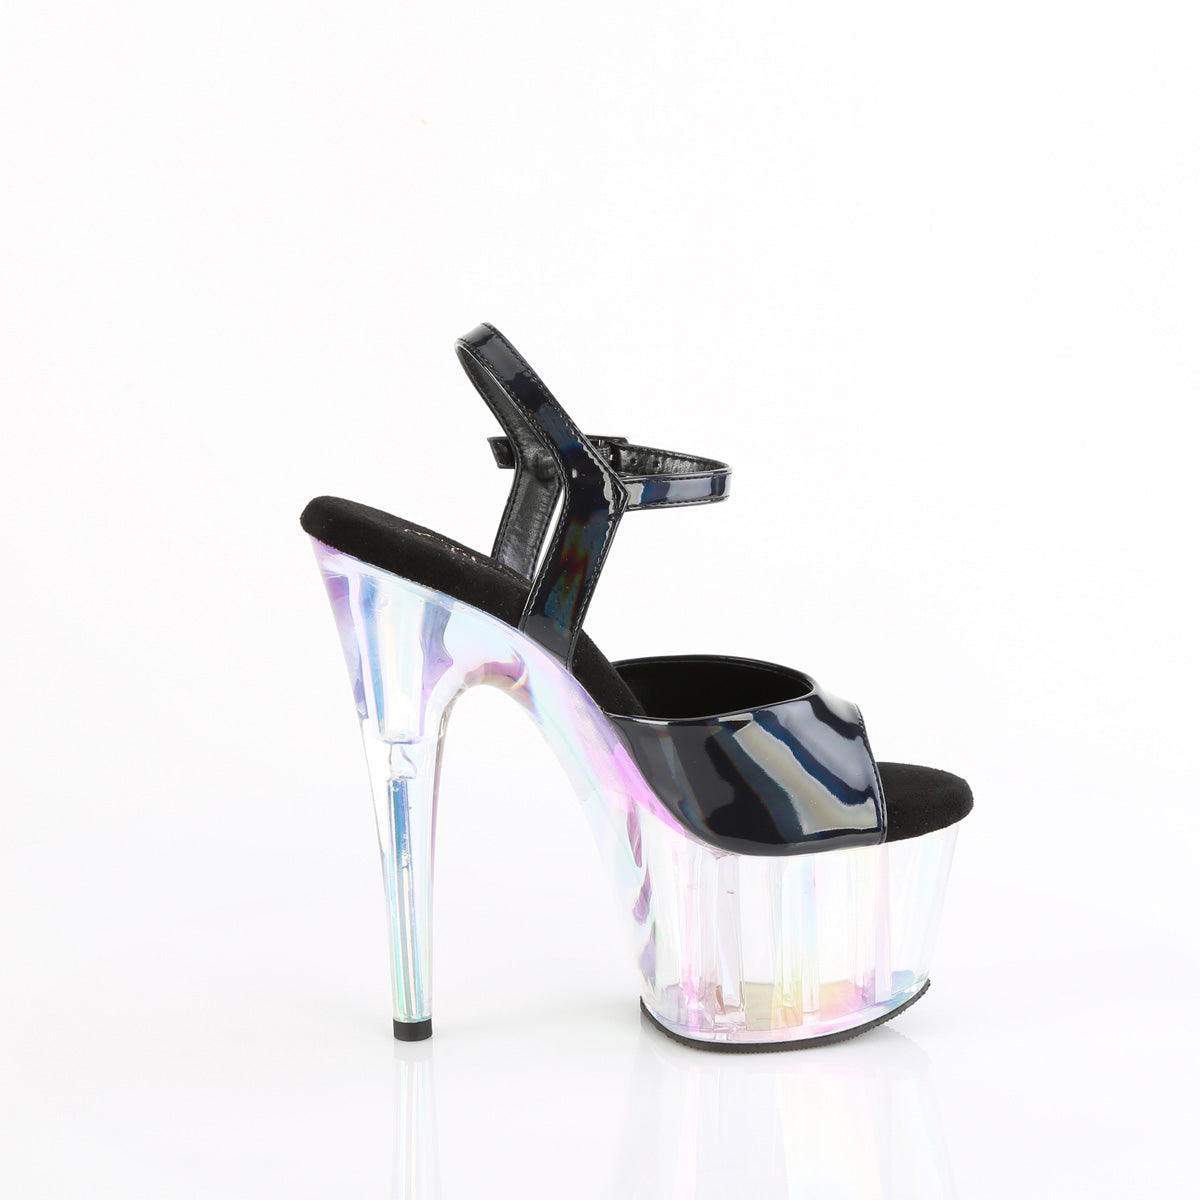 ADORE-709HT Black & Clear Ankle Peep Toe High Heel